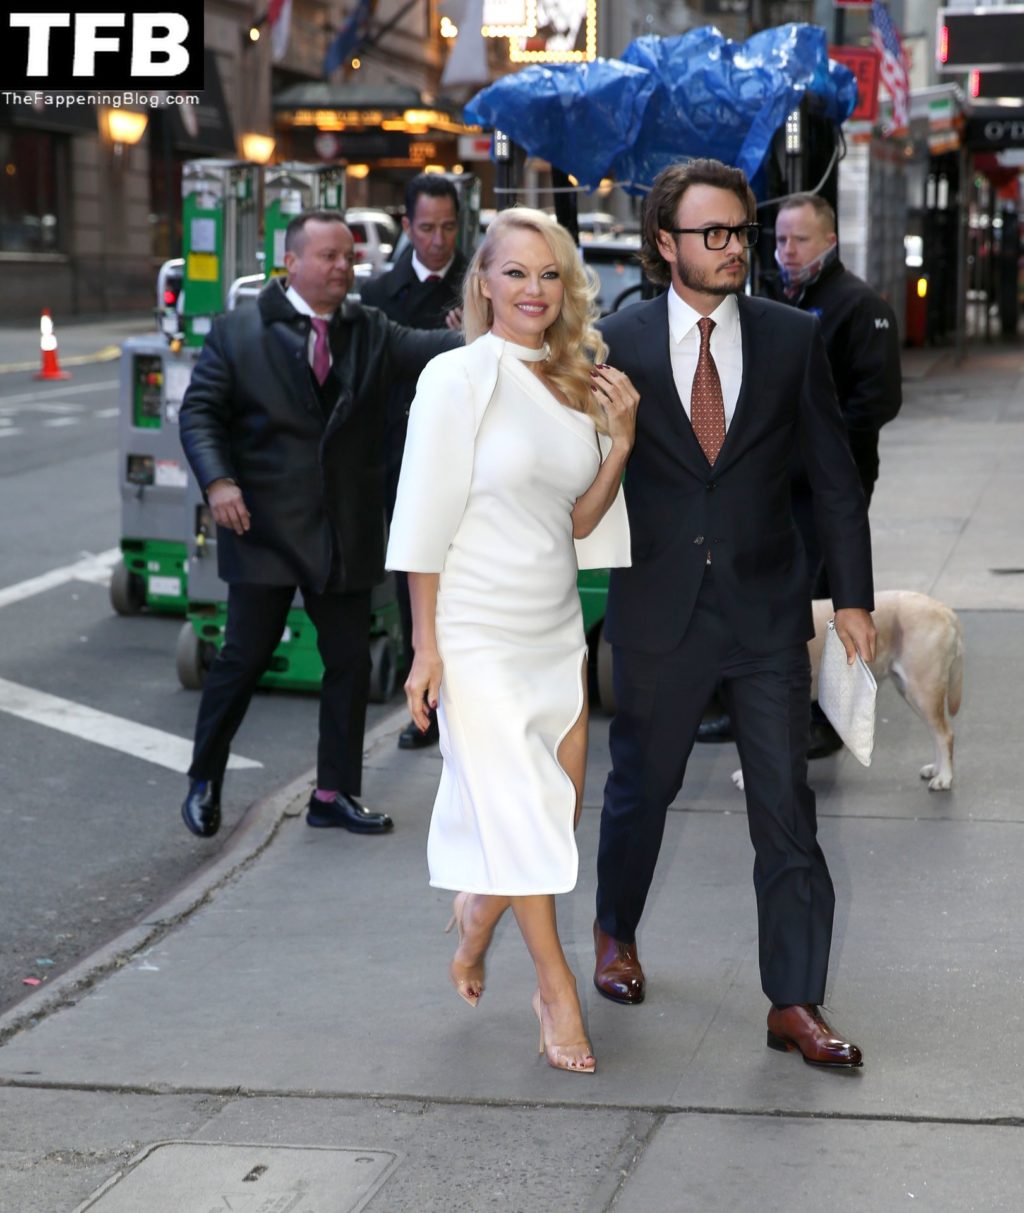 Pamela Anderson Sexy The Fappening Blog 49 1024x1213 - Pamela Anderson Heads to Good Morning America (107 Photos + Video)